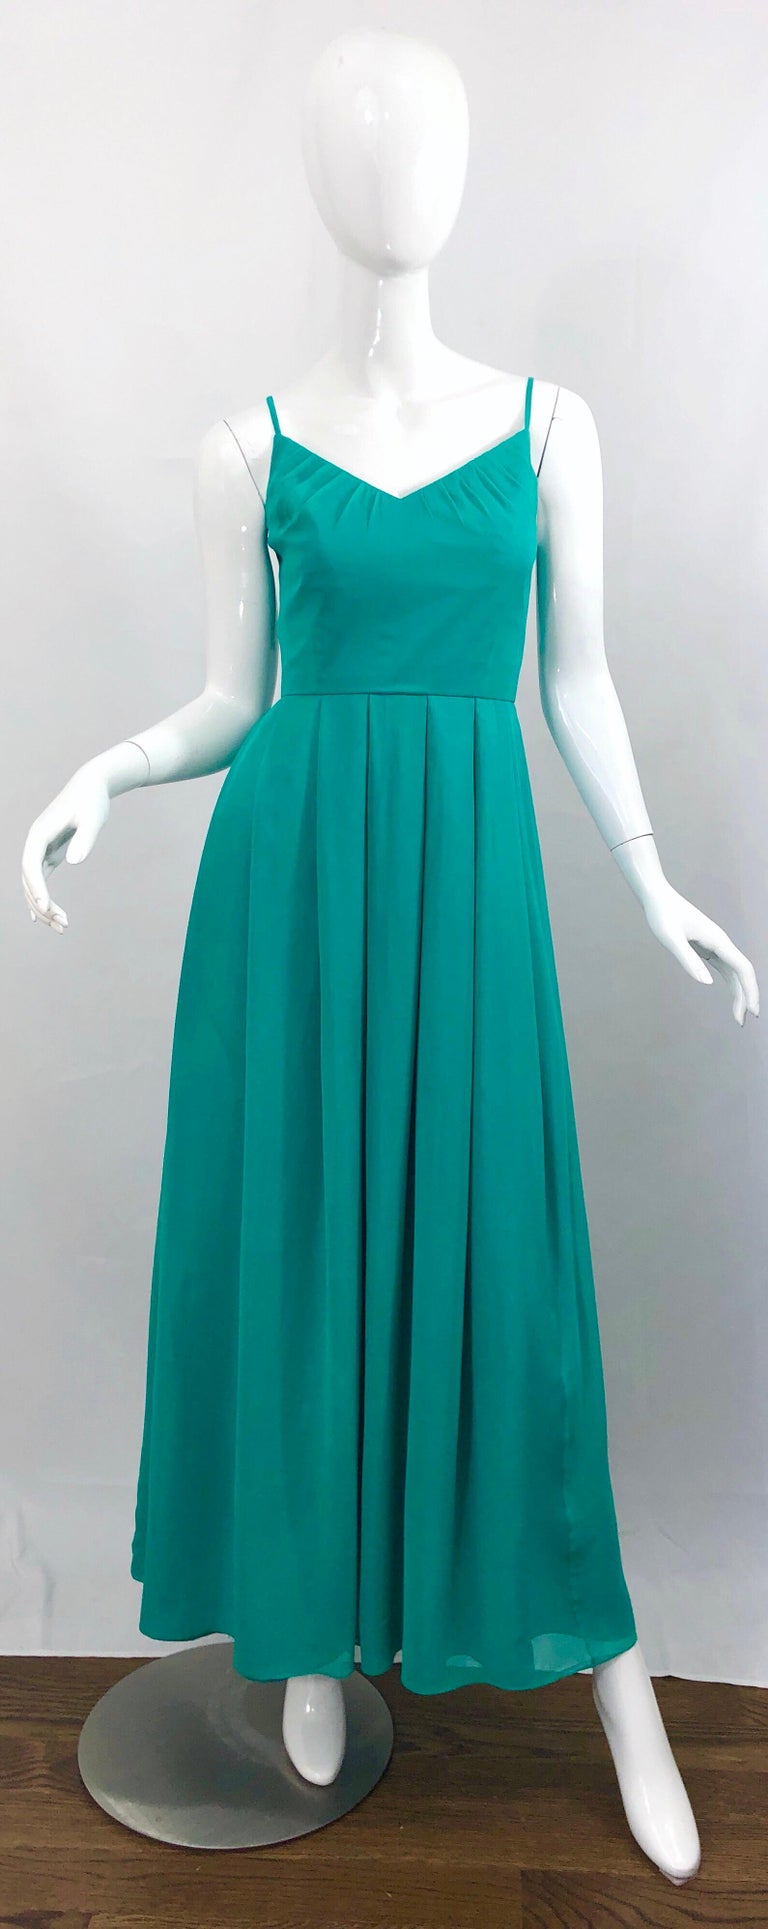 Beautiful mid 1970s teal green / blue aqua silk chiffon demi couture maxi dress / gown ! Words cannot even begin to convey the level of workmanship on this beauty. Sleeveless bodice, with strategically placed gathers that both elongate and flatter